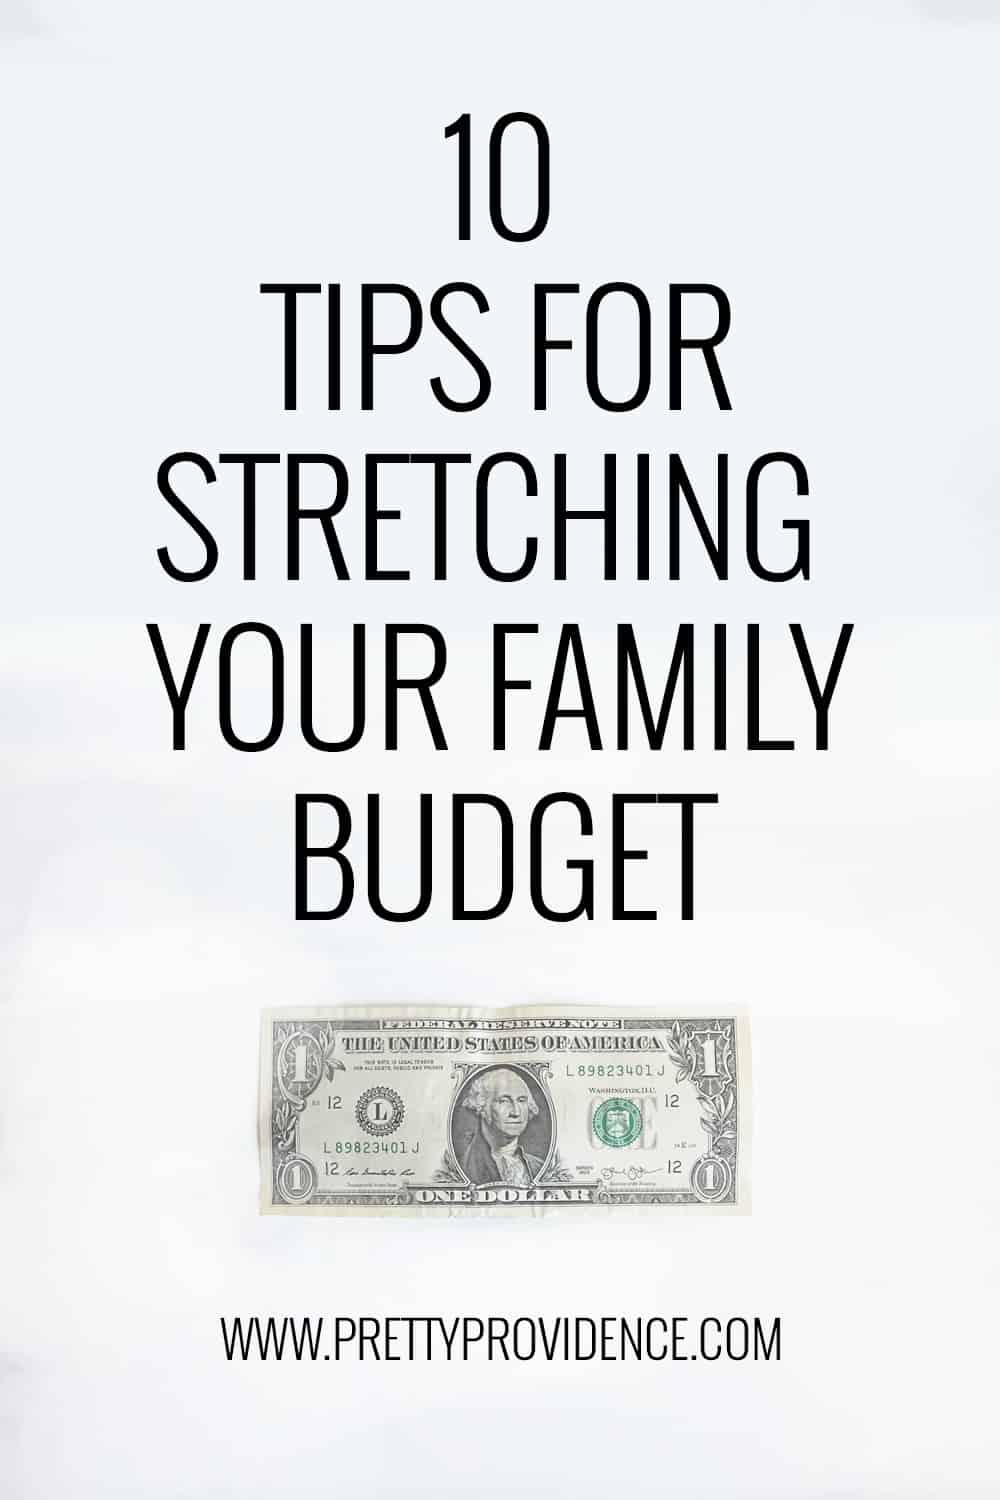 Some really great ideas and reminders in here for stretching your family budget!